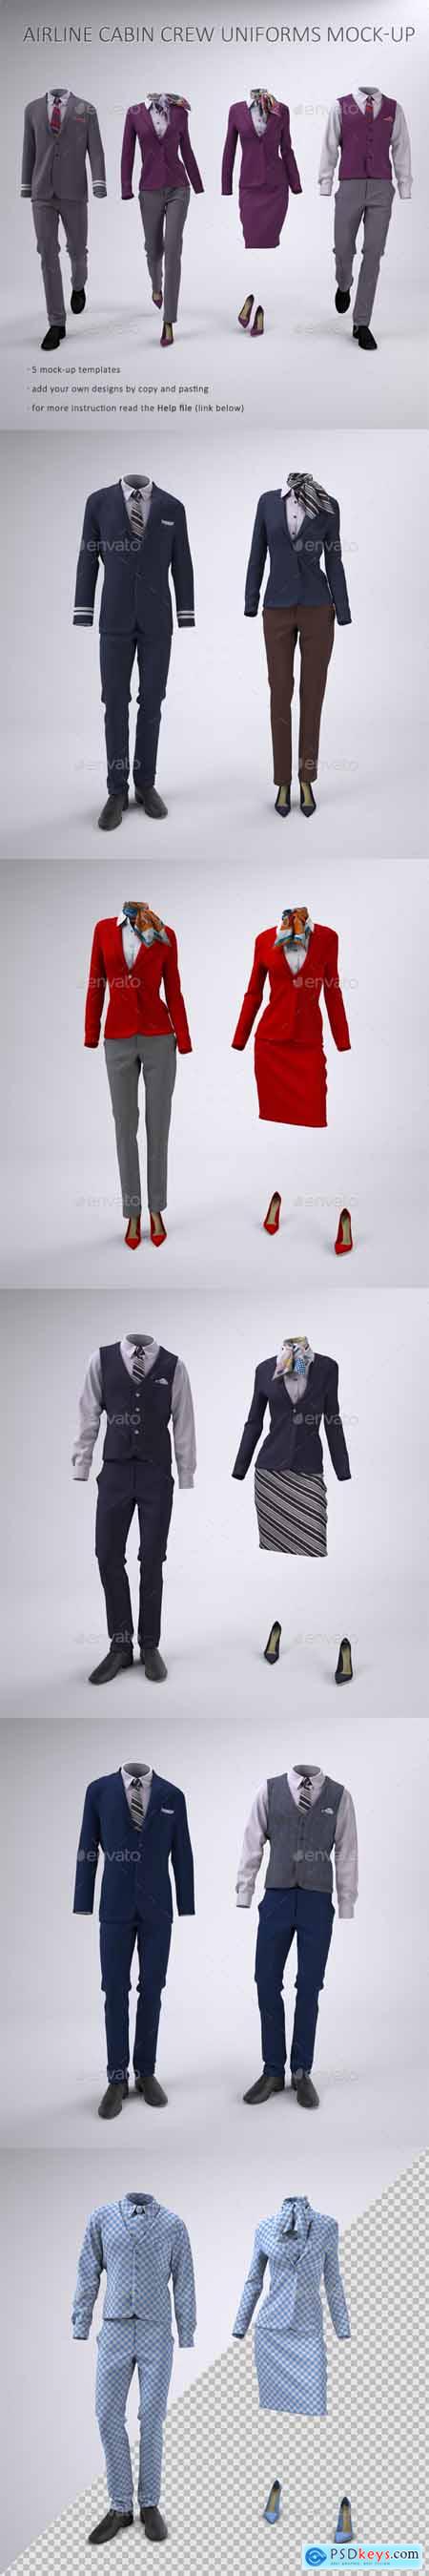 Download Airline Cabin Crew or Hotel Uniforms Mock-Up 23268316 » Free Download Photoshop Vector Stock ...